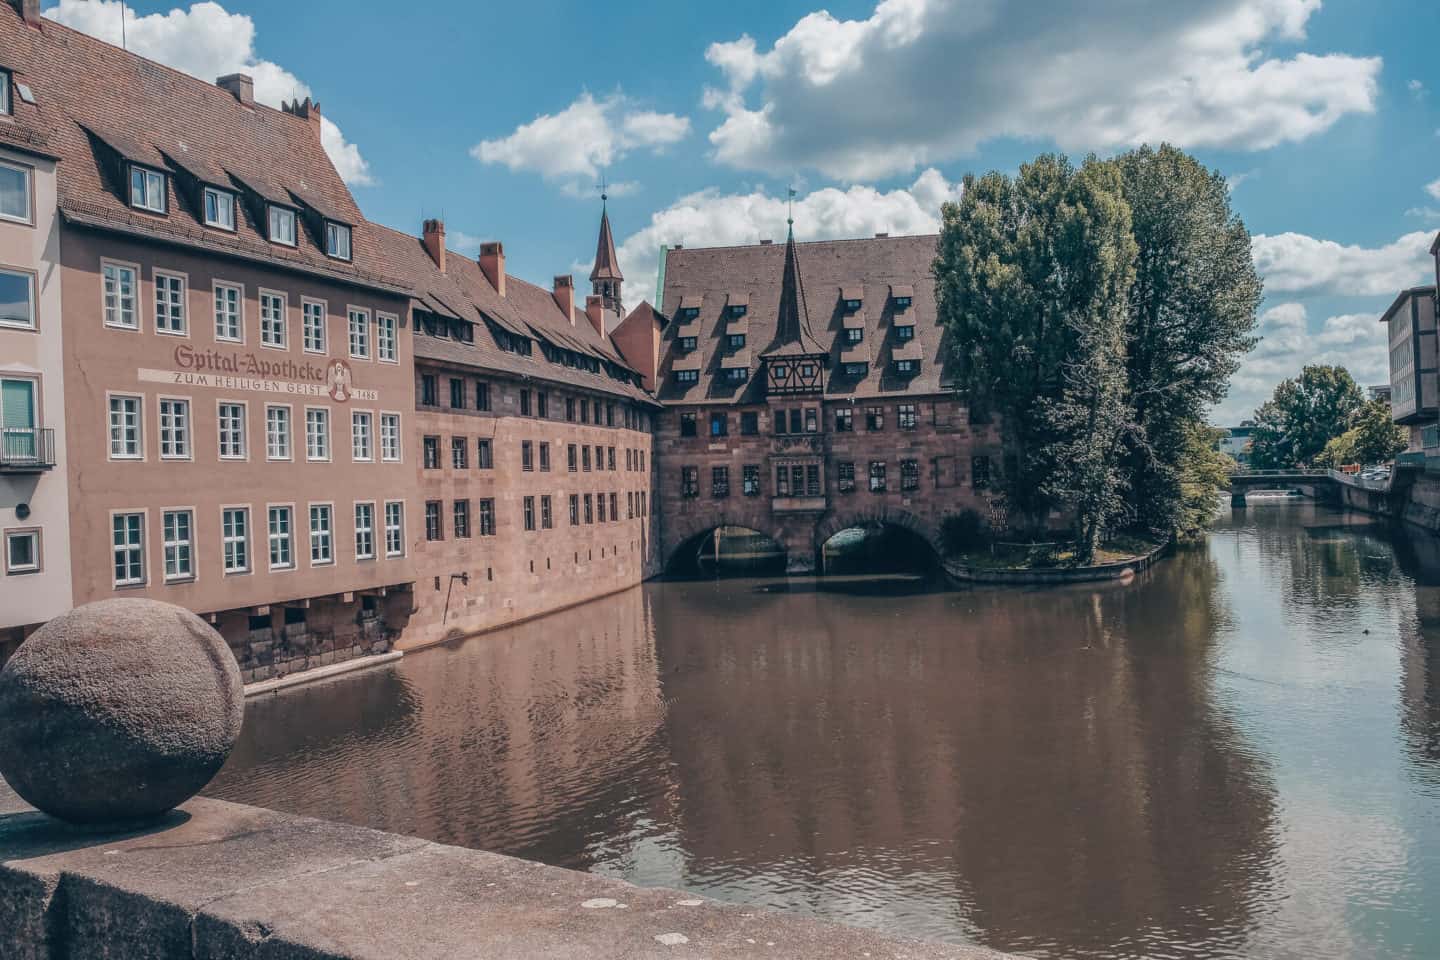 "A serene view of the Pegnitz River flowing through Nuremberg, flanked by historic sandstone buildings with steep roofs and rows of windows reflecting on the water's surface. The famous Heilig-Geist-Spital, a hospital from medieval times, stands prominent with its picturesque bridge connecting the structures, offering a glimpse into the city's storied past on a peaceful day.